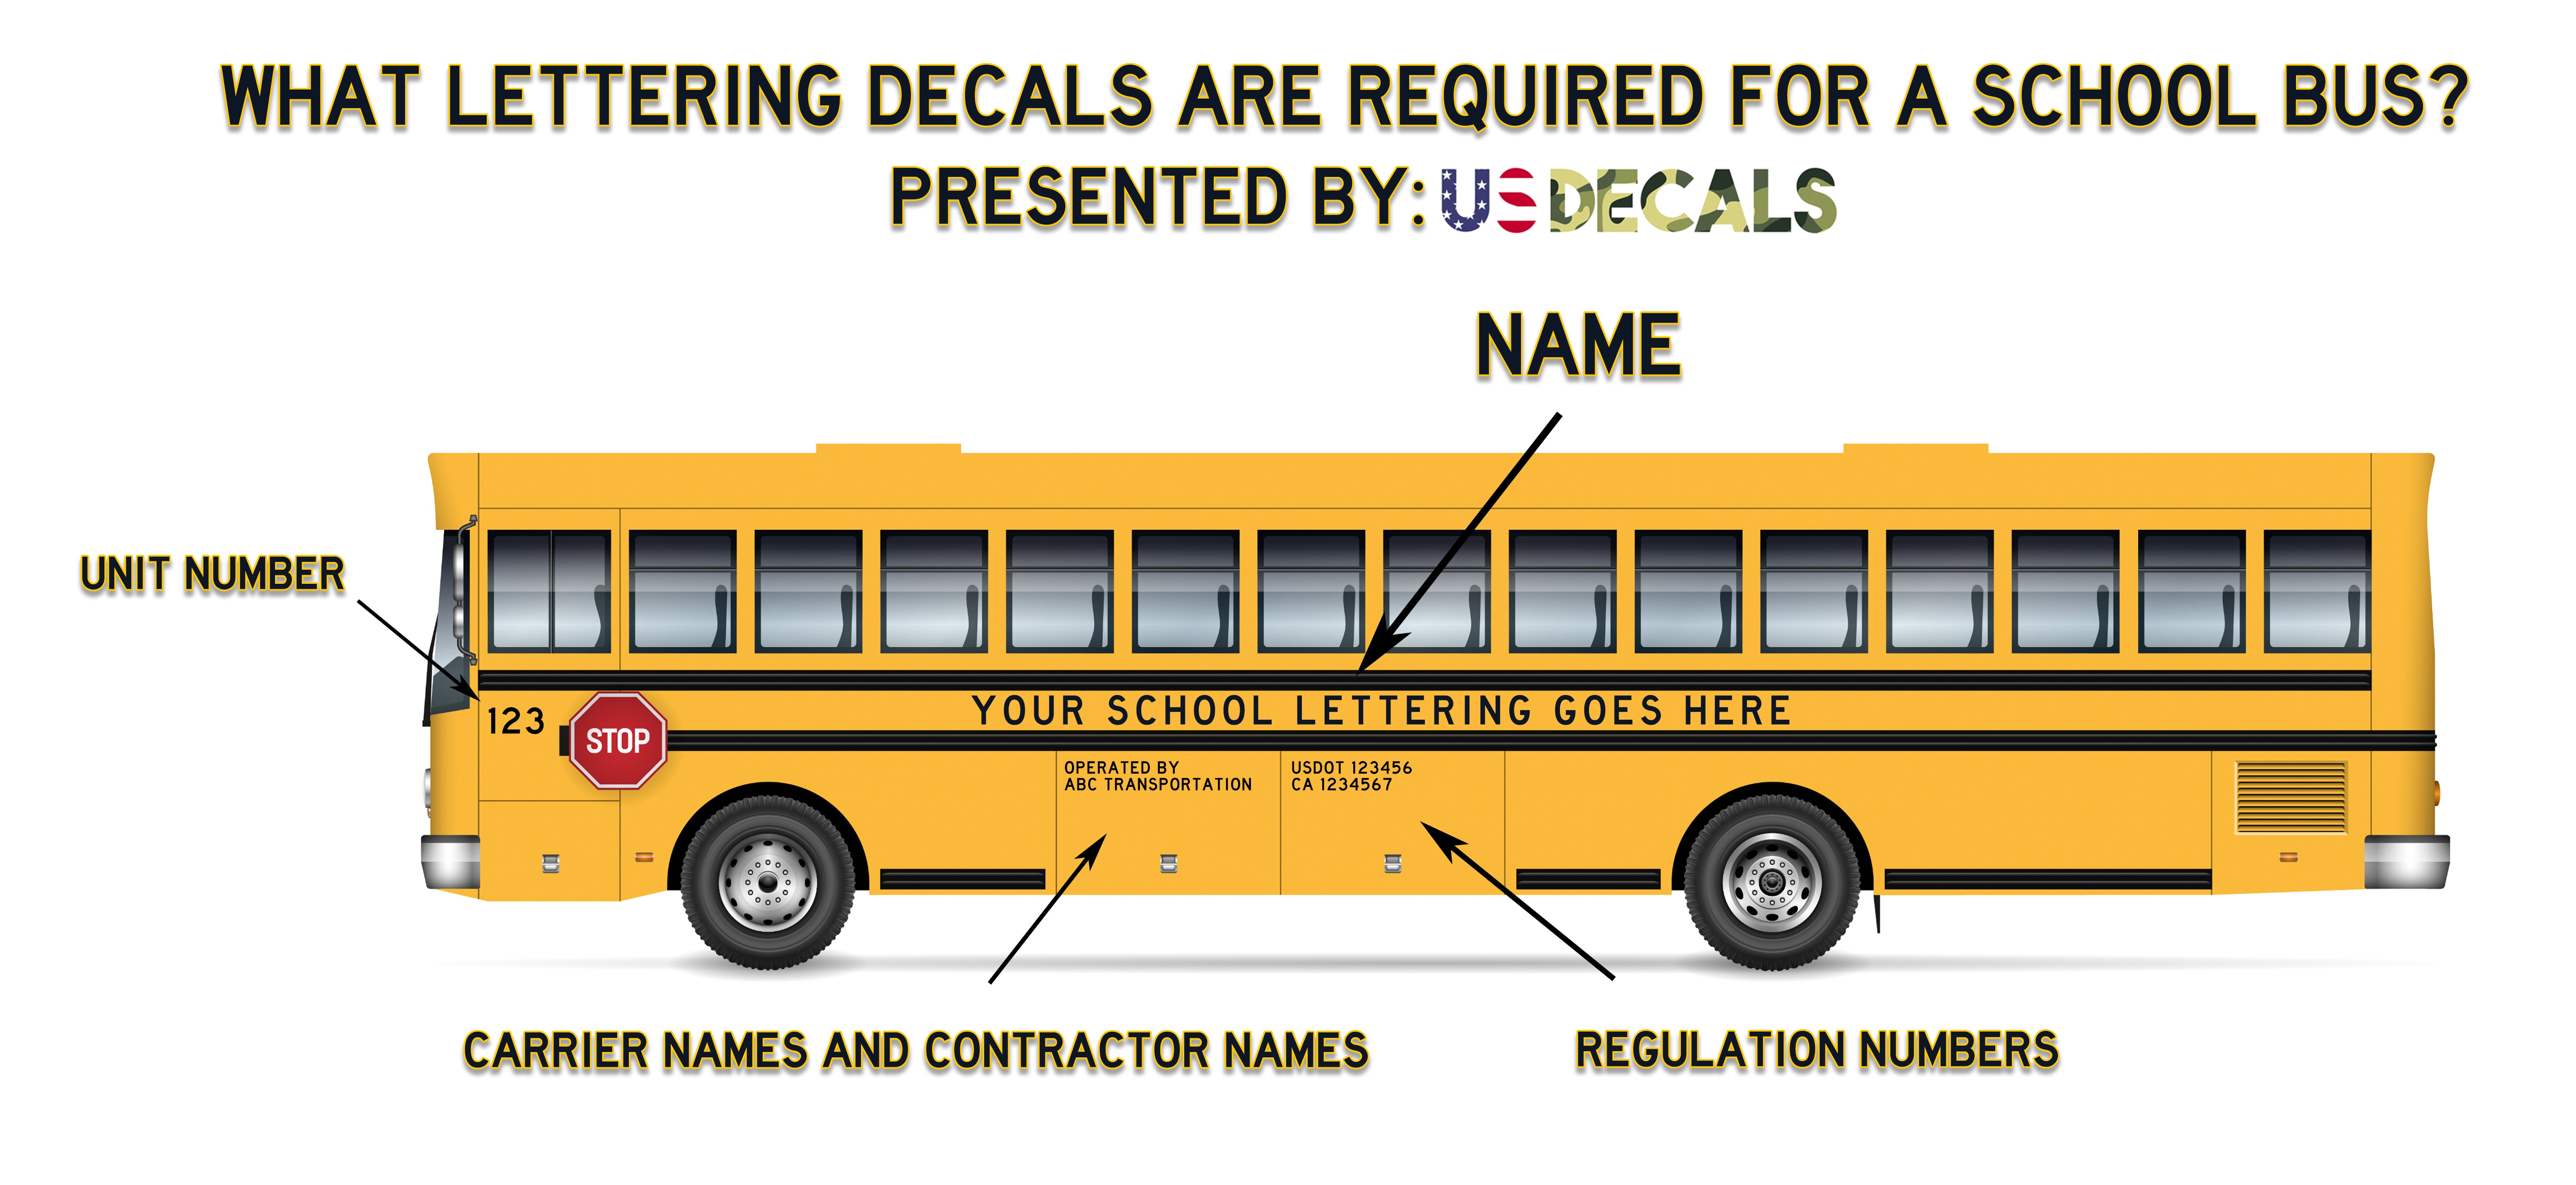 what lettering decals are required for your school bus?